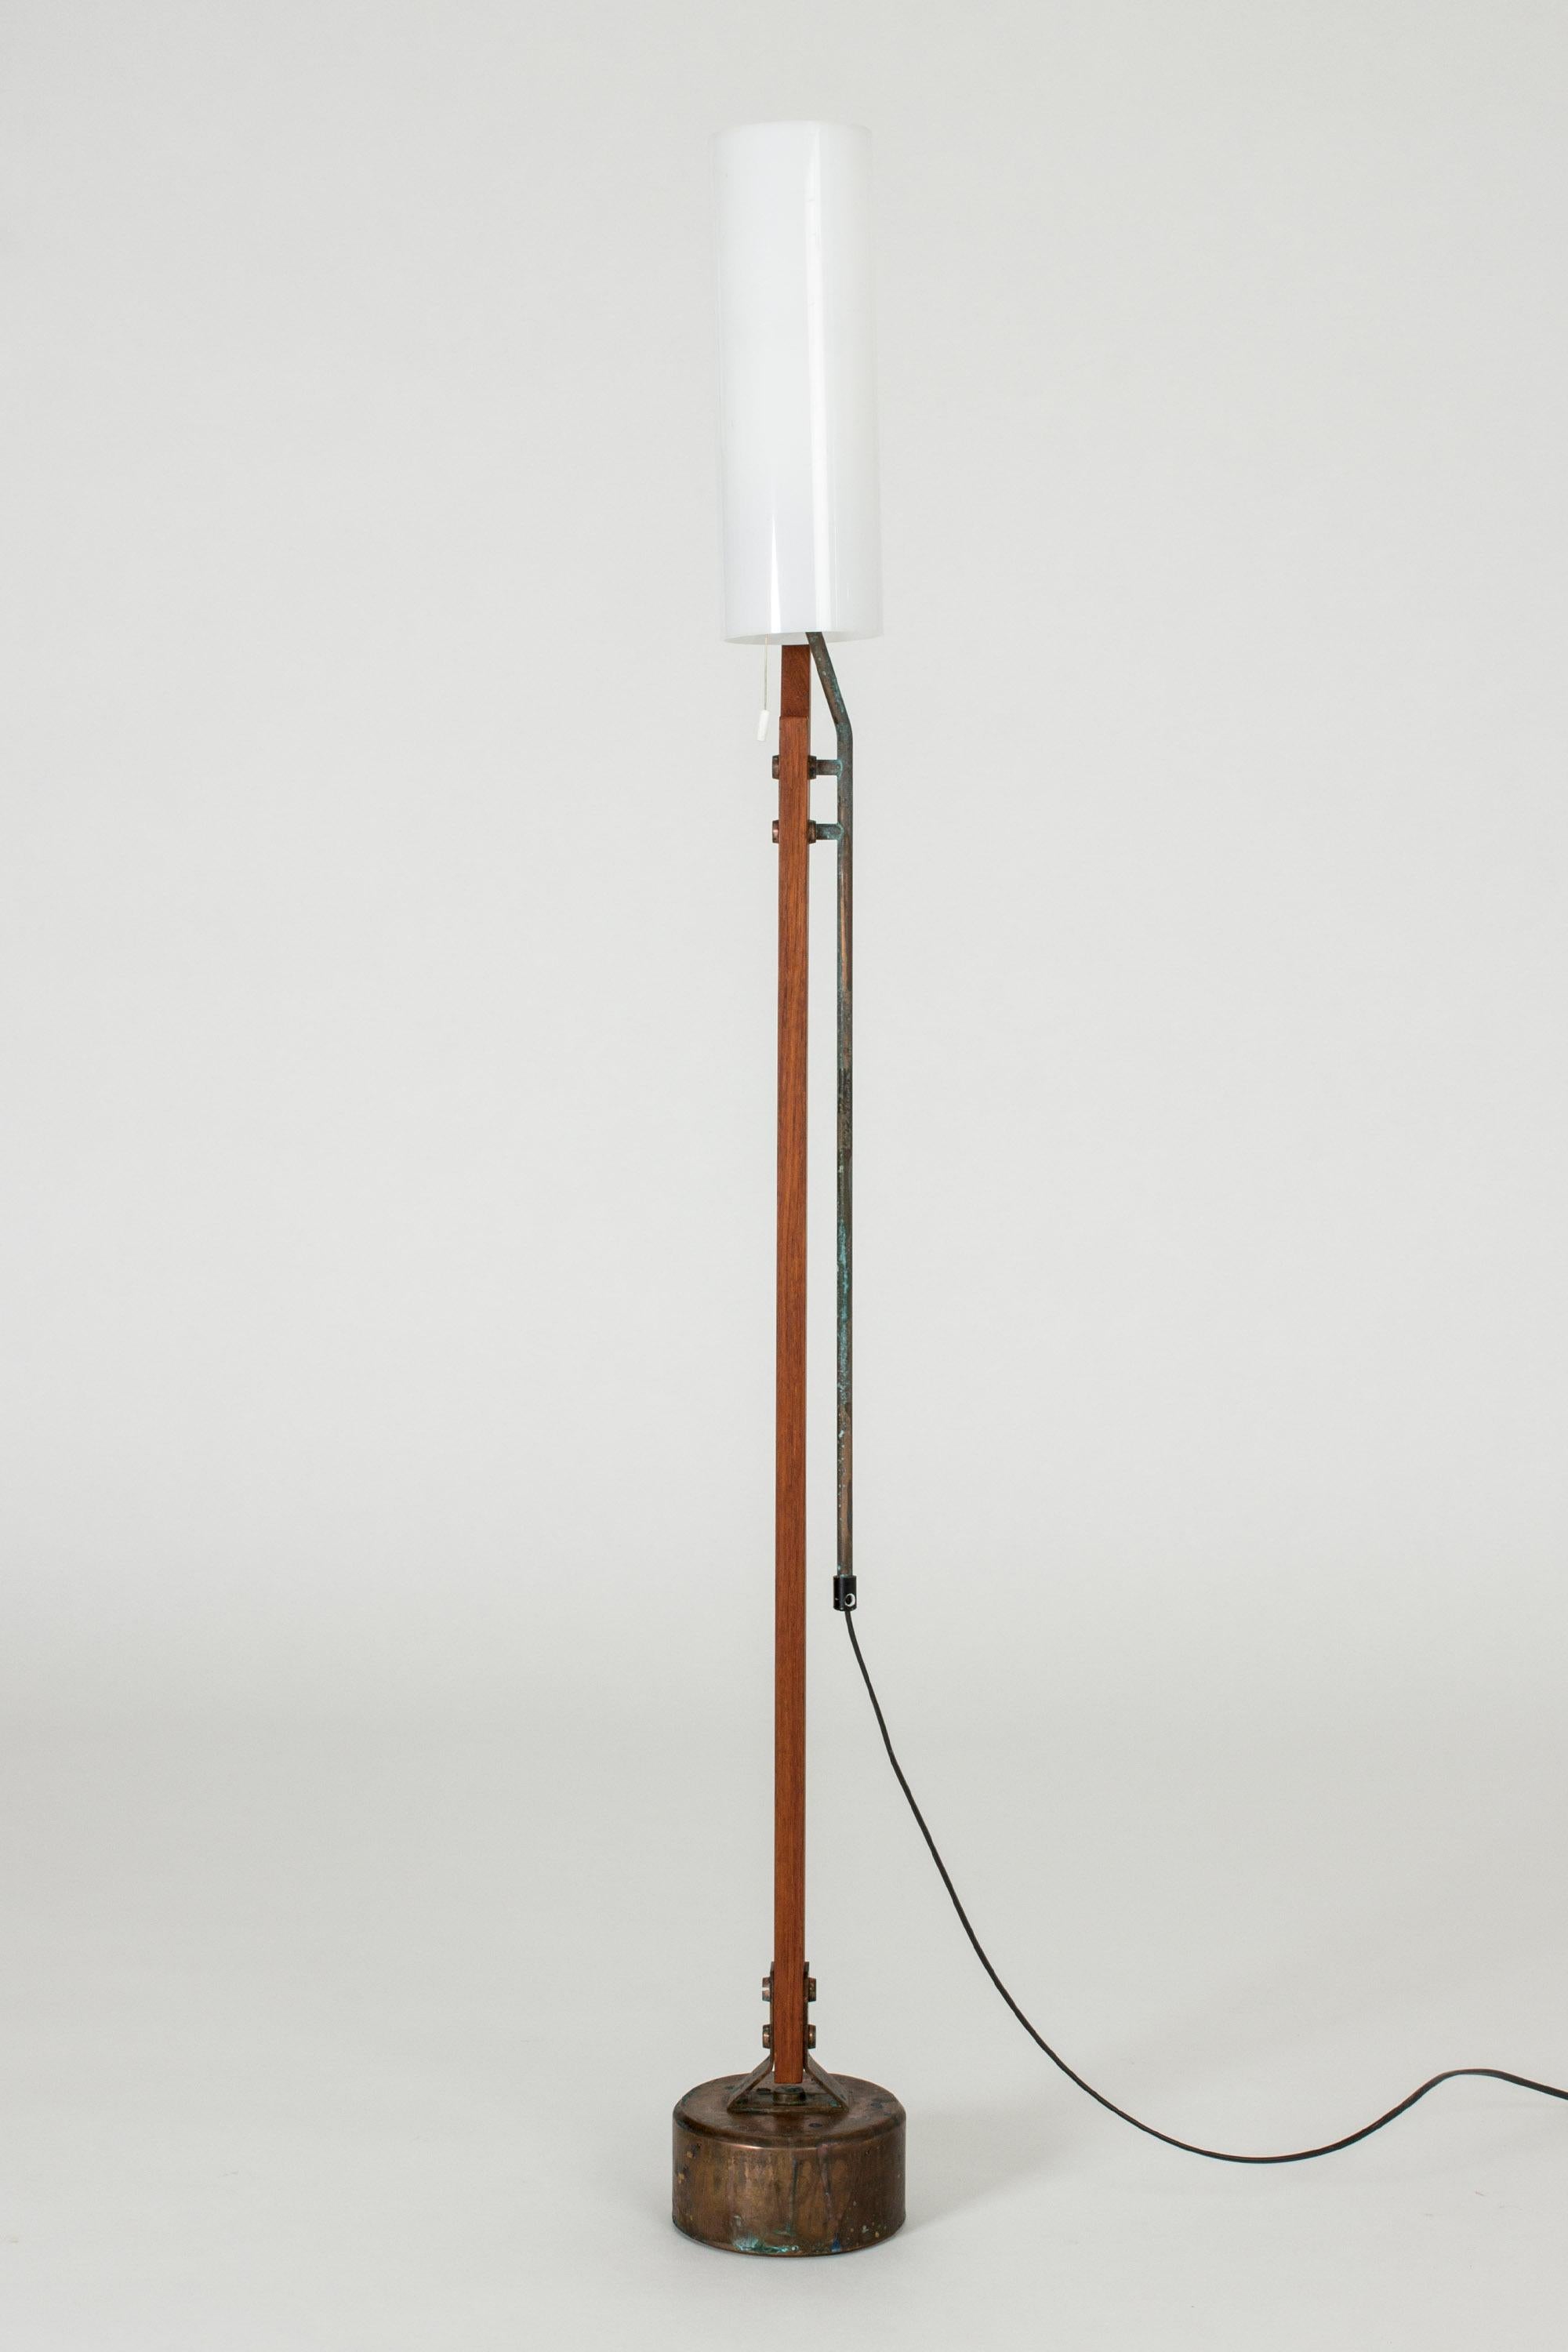 Very cool floor lamp from Orrefors, with a teak handle and copper base. The wiring runs through a copper pipe on the outside of the handle for a bit of an industrial effect. Cylinder shaped shade made from acrylic.